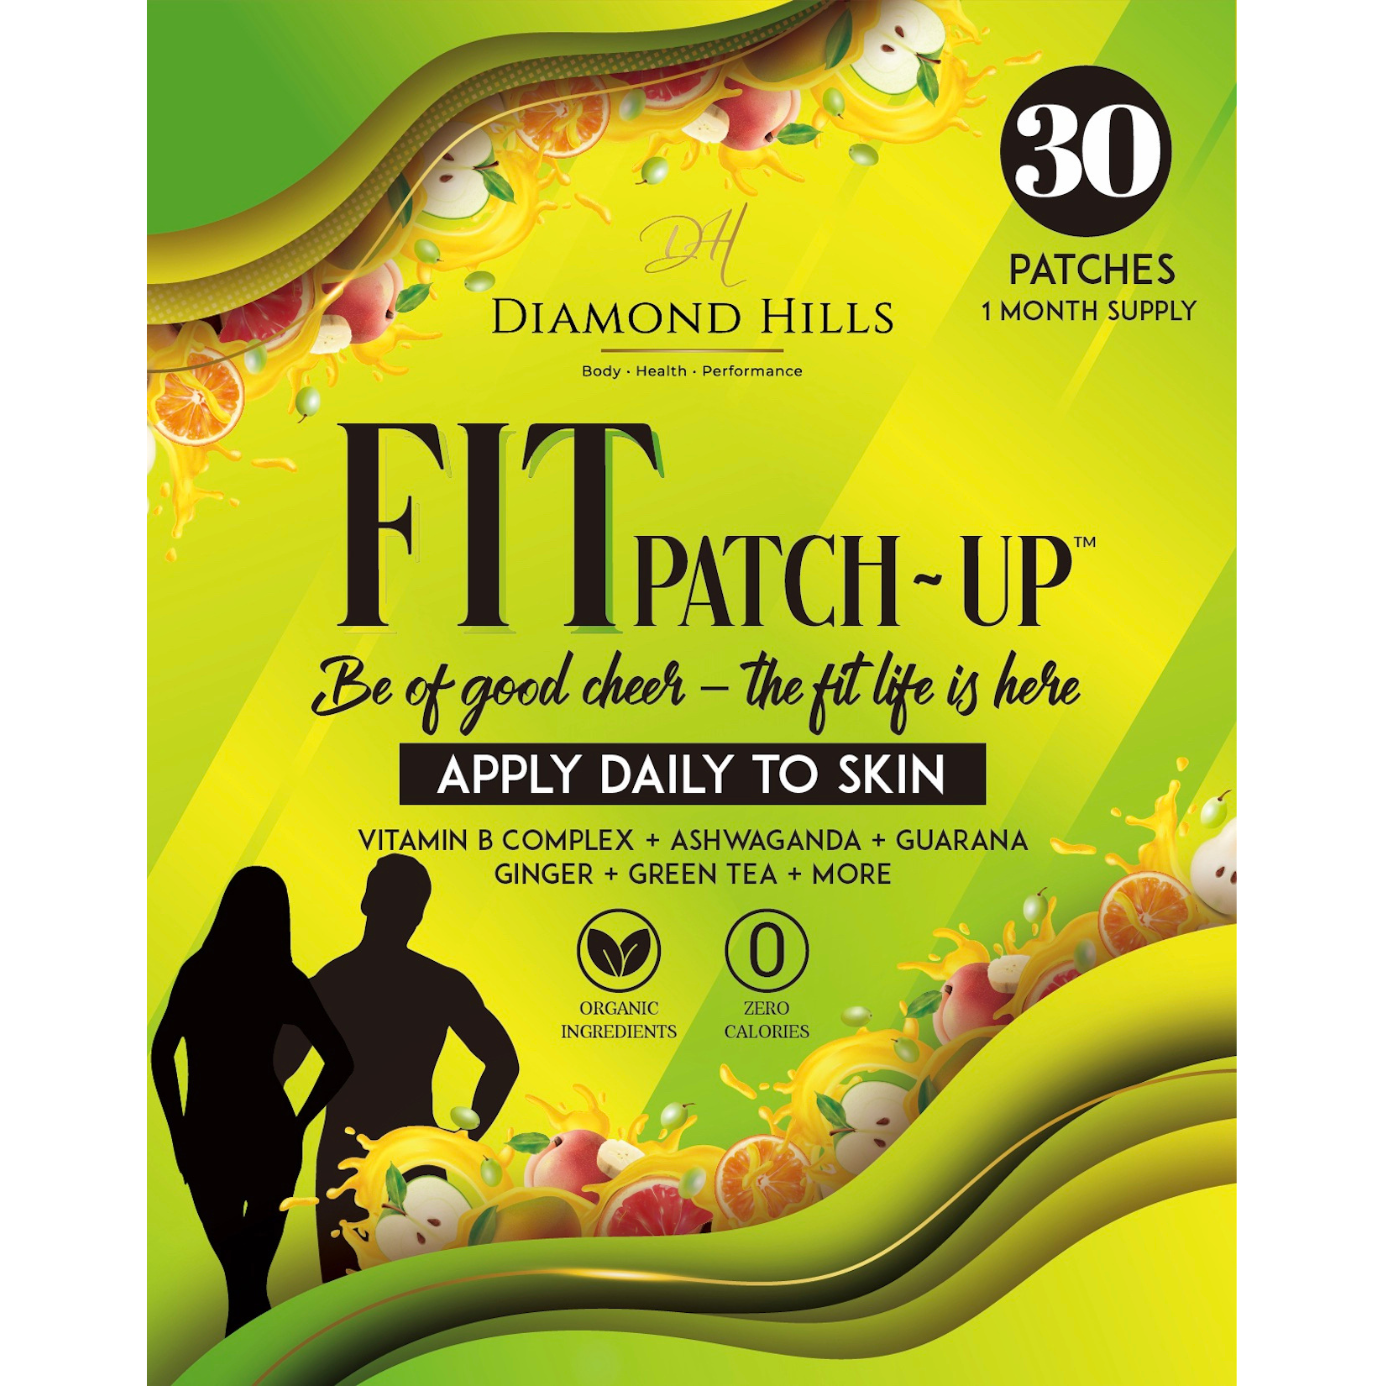 Diamond Hills Patch-Up - 12-Pack Hangover Patches - Maximum Recovery - Waterproof, Organic Ingredients Vitamin B, DHM, Ginger, Prickly Pear